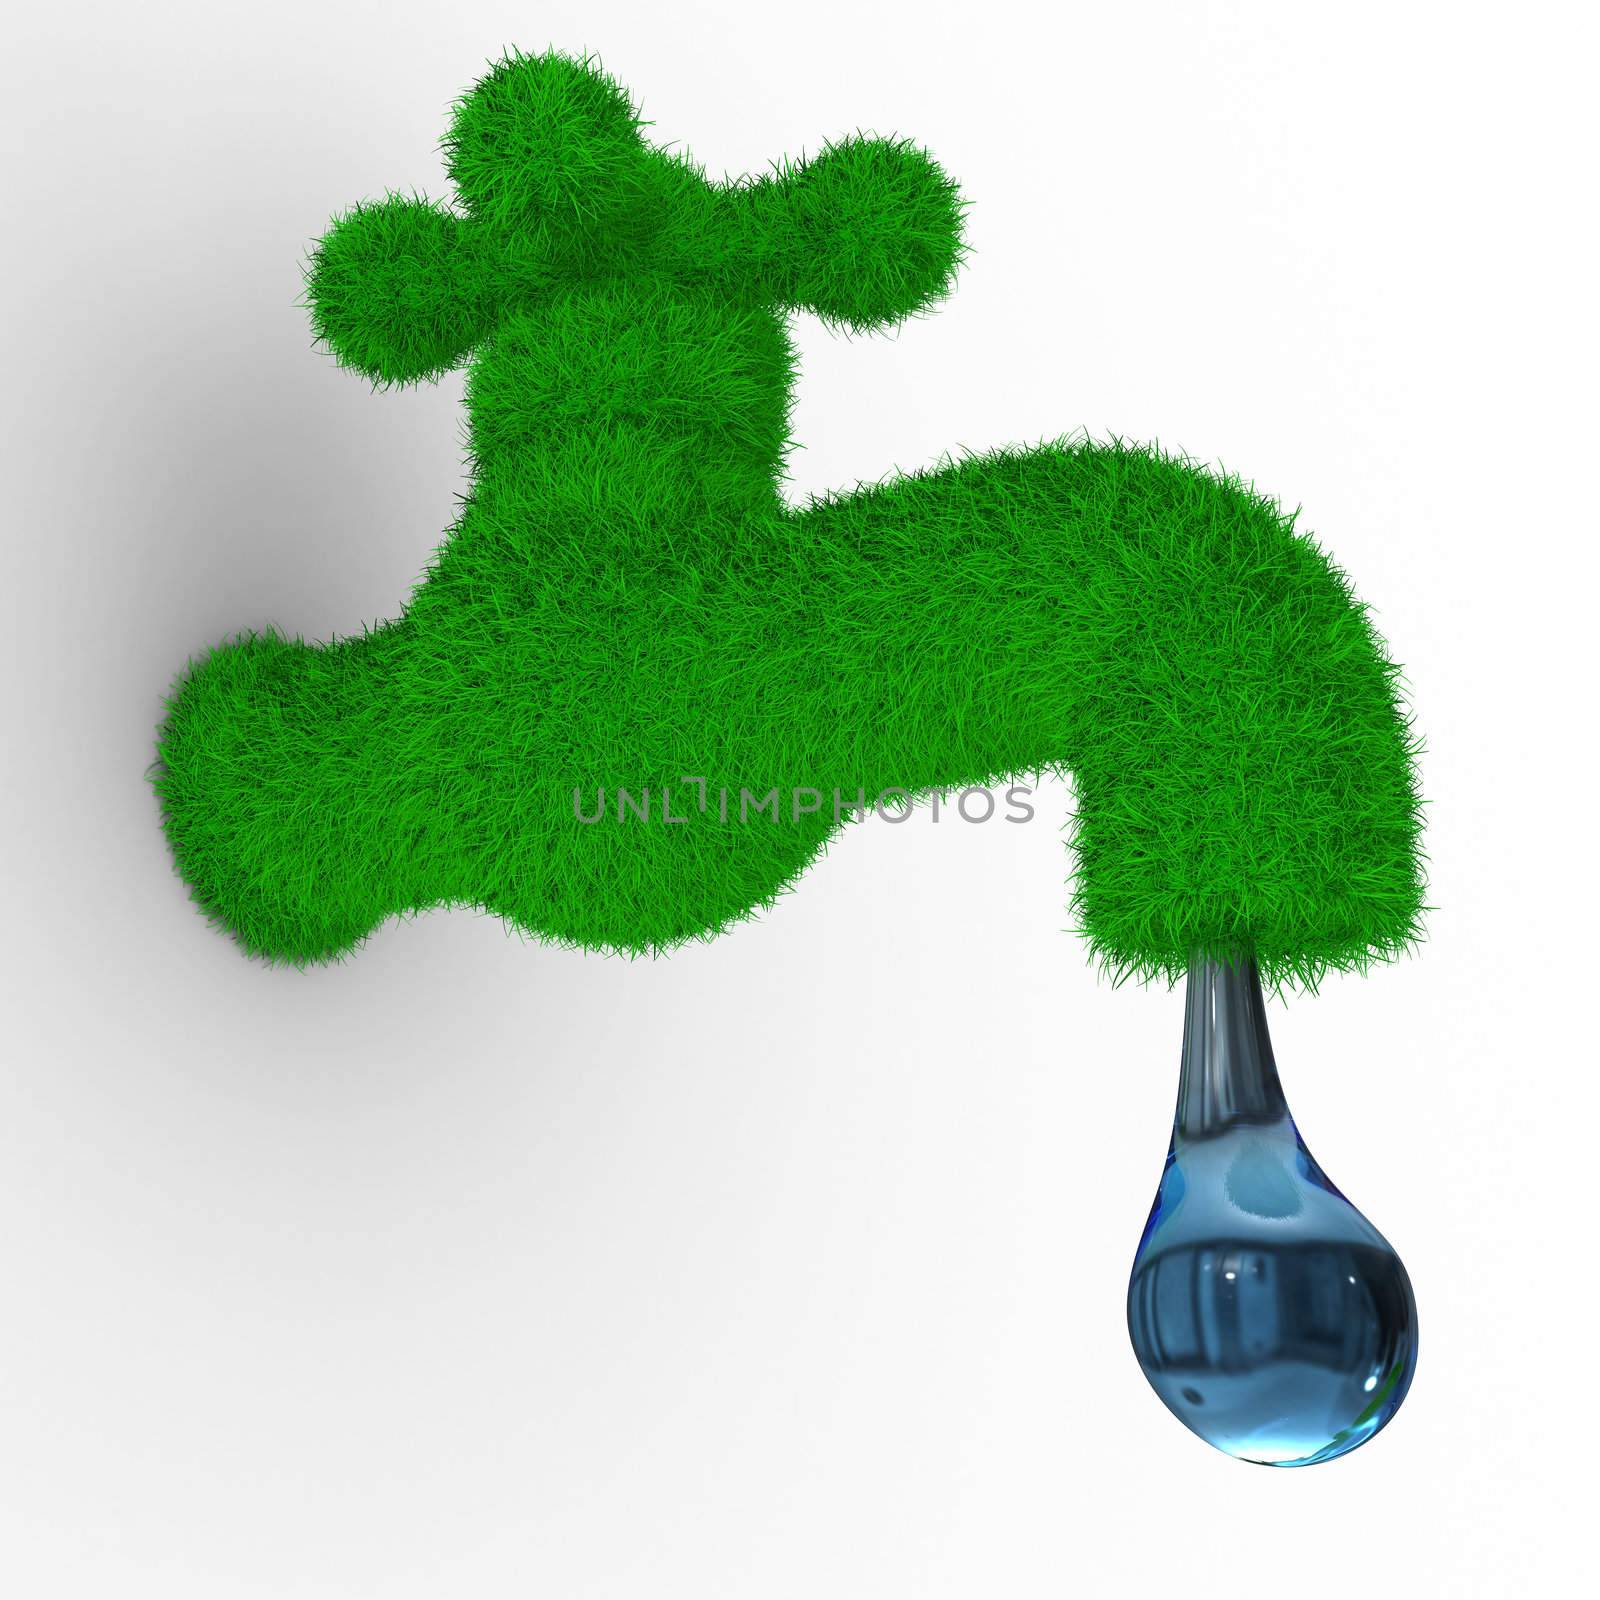 tap on white background. Isolated 3D image